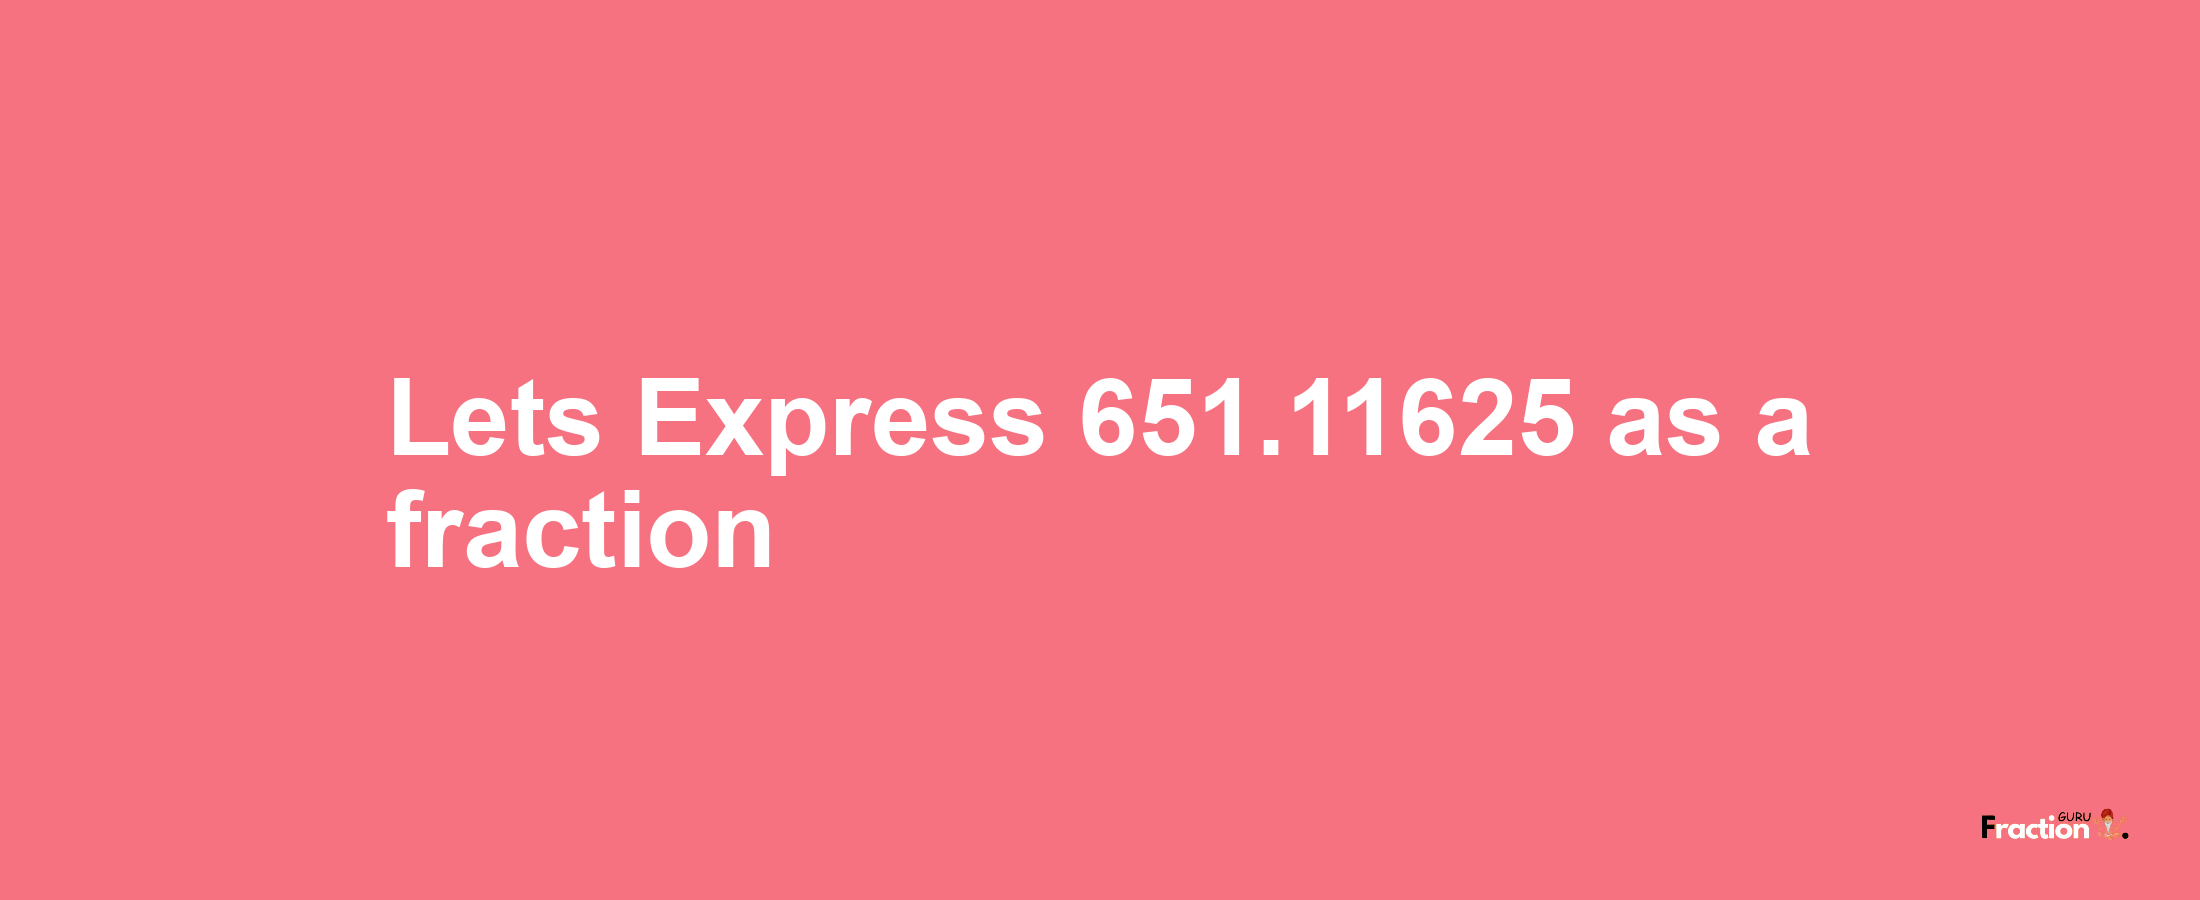 Lets Express 651.11625 as afraction